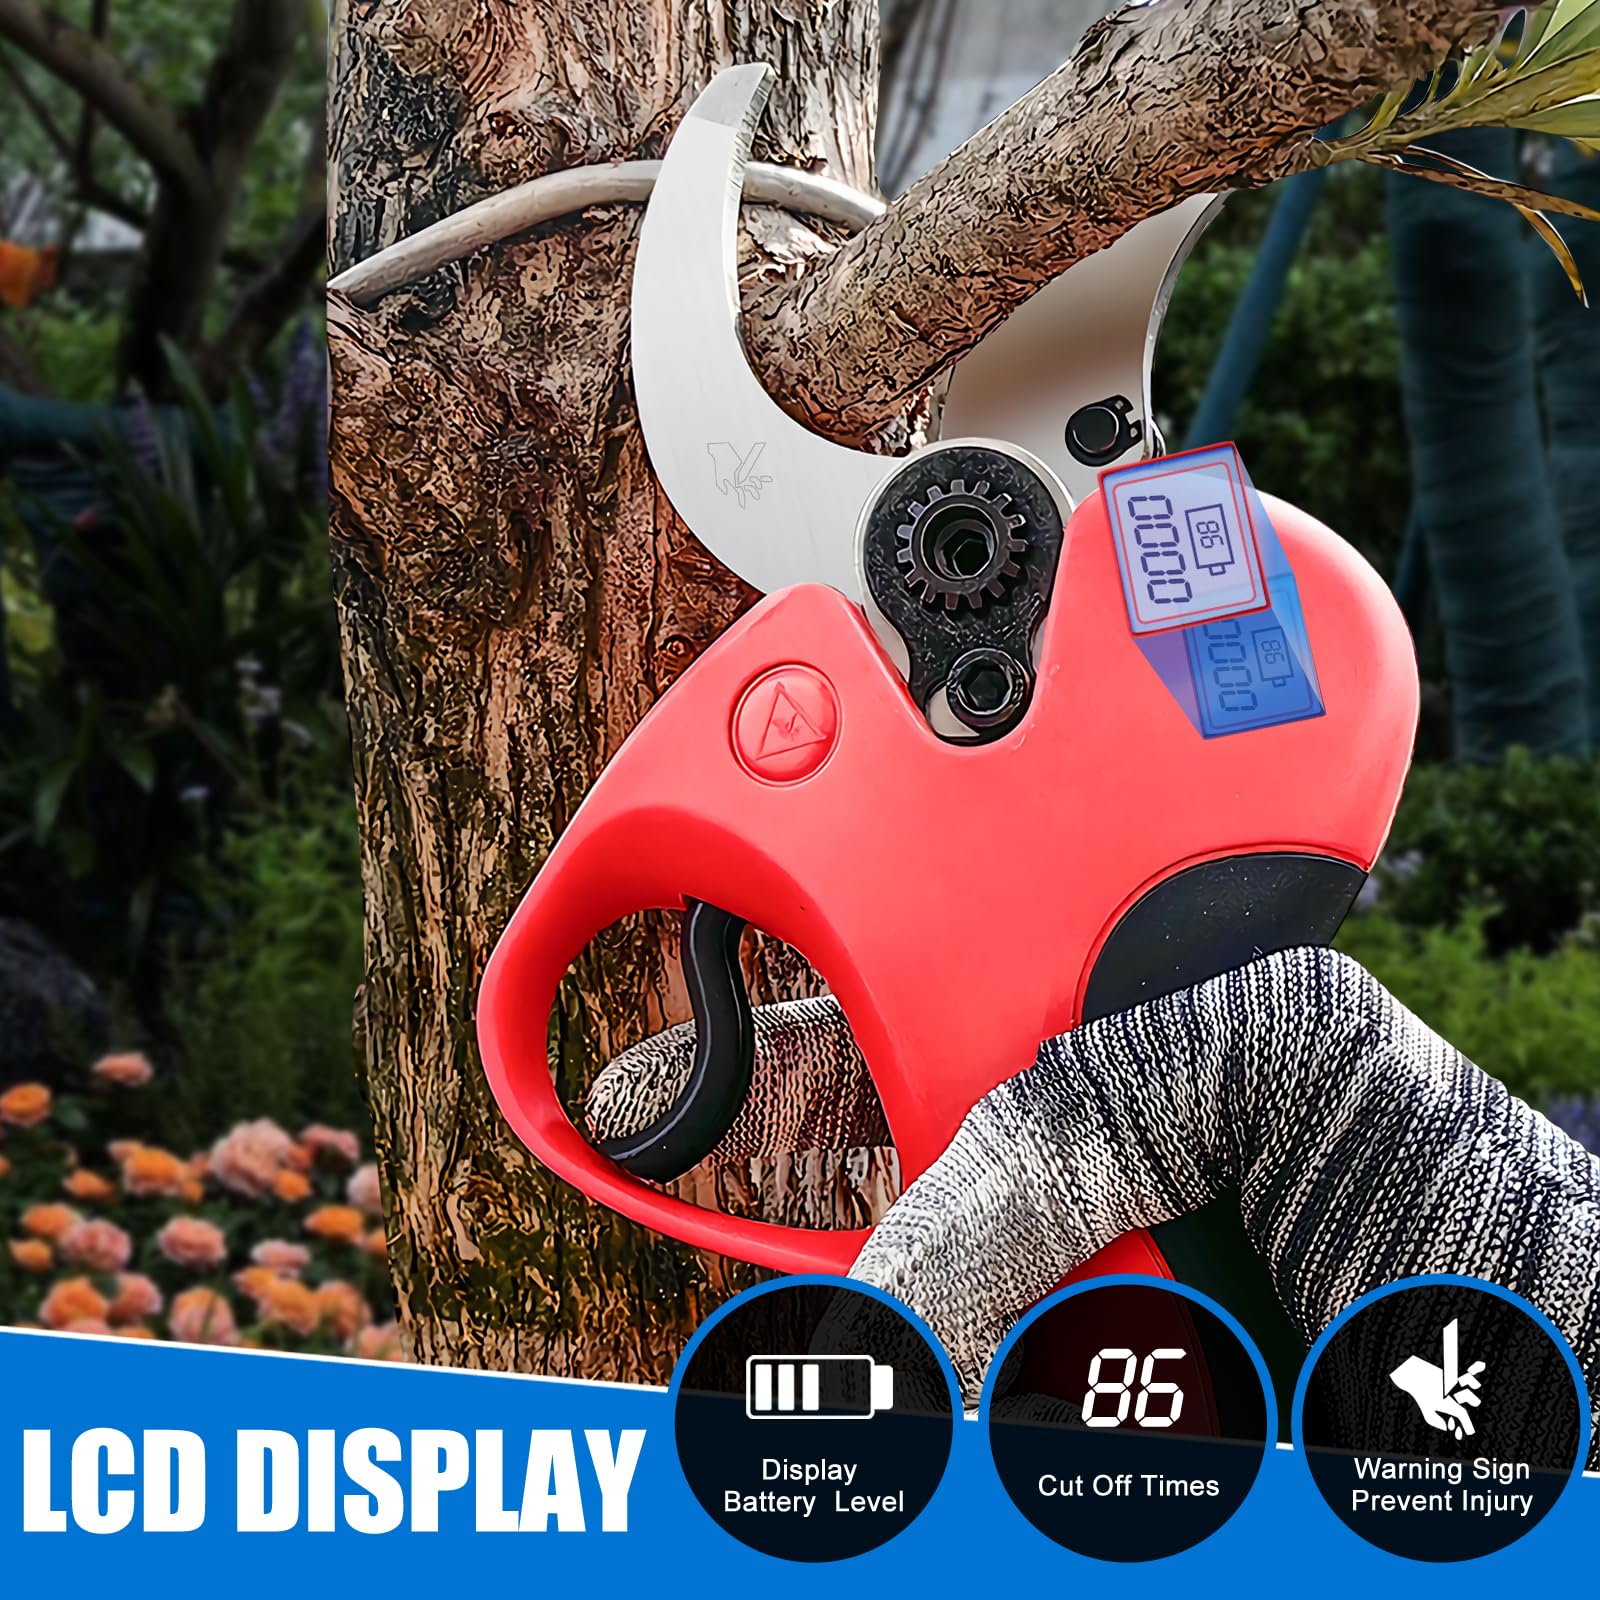 LCD DISPLAY: Display Battery Level Cut Off Times Done Warning Sign to Prevent Injury